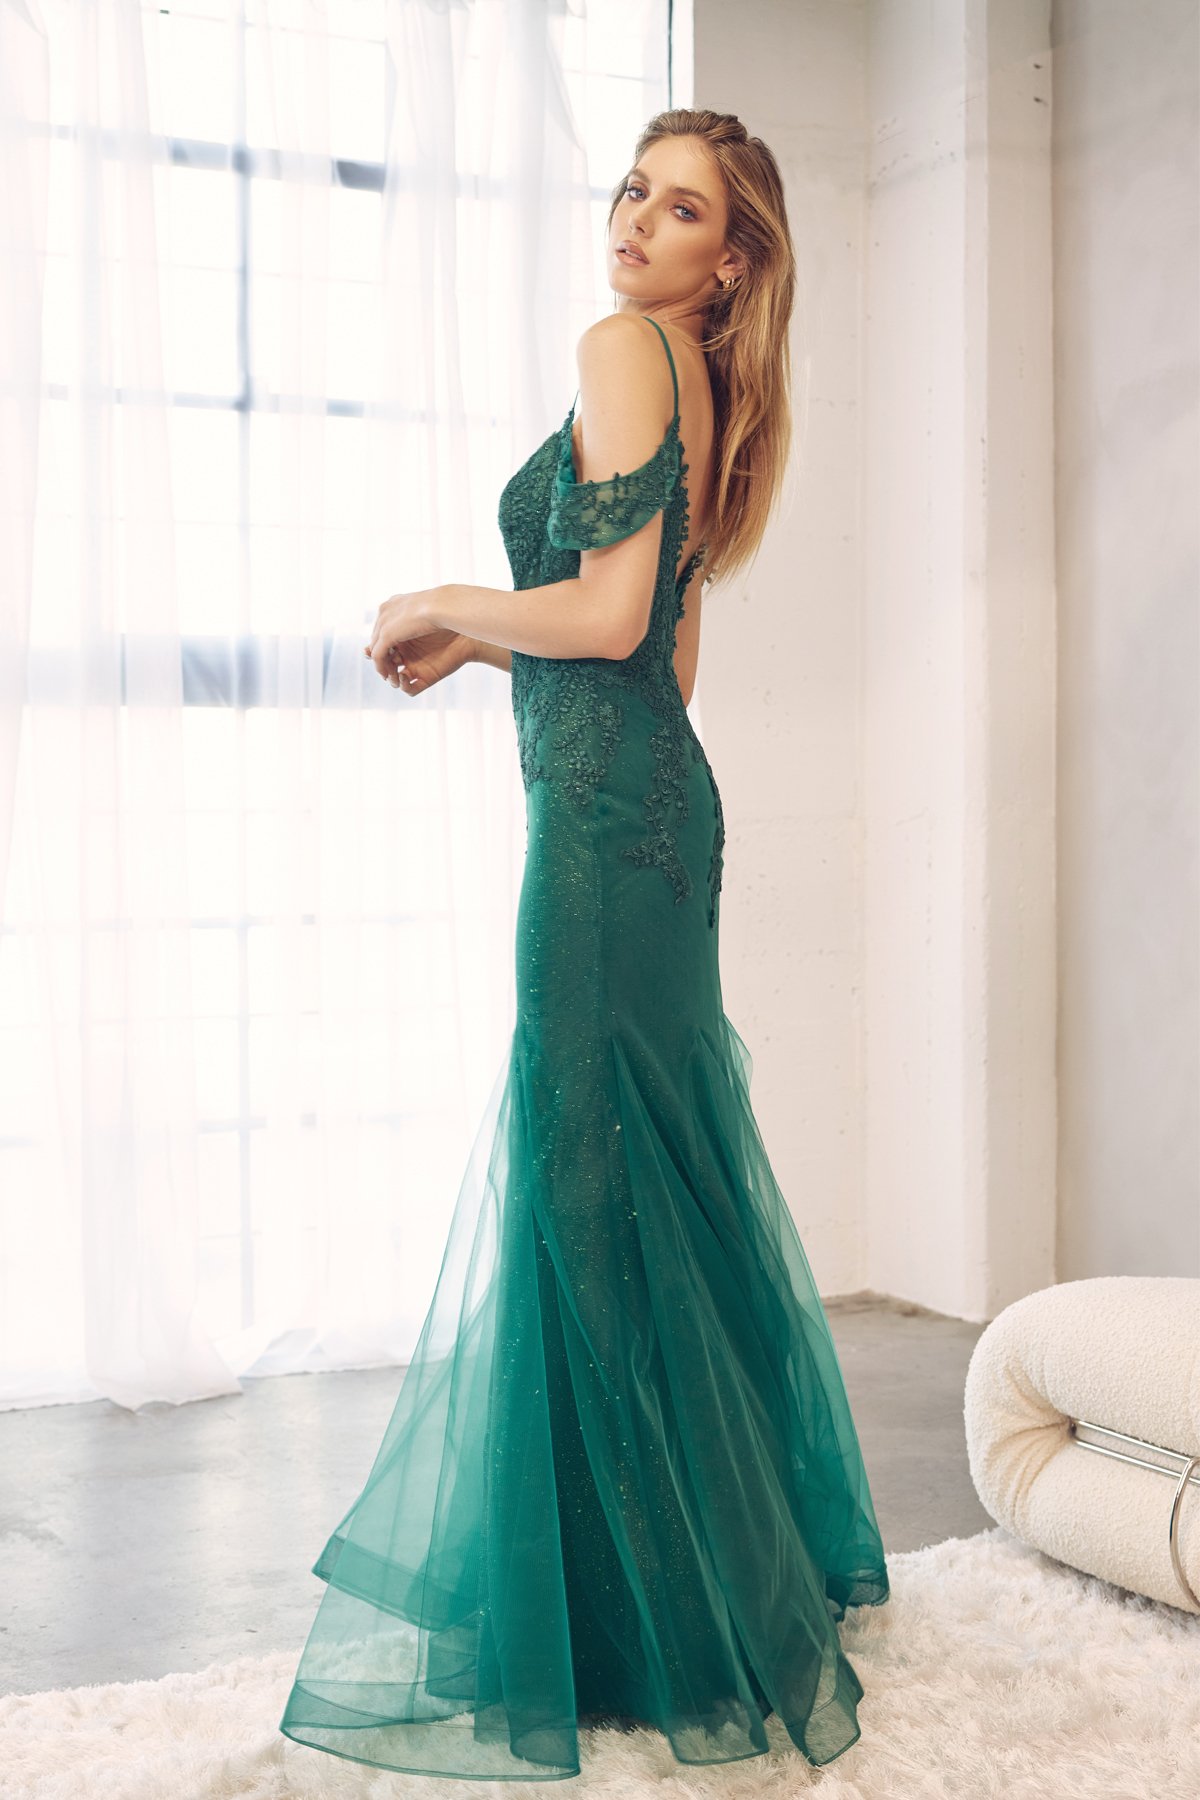 Luxury Green Beaded Evening / Prom / Wedding Mermaid Dress Made to Order,  Strapless Sparkling Green Evening Dress - Etsy